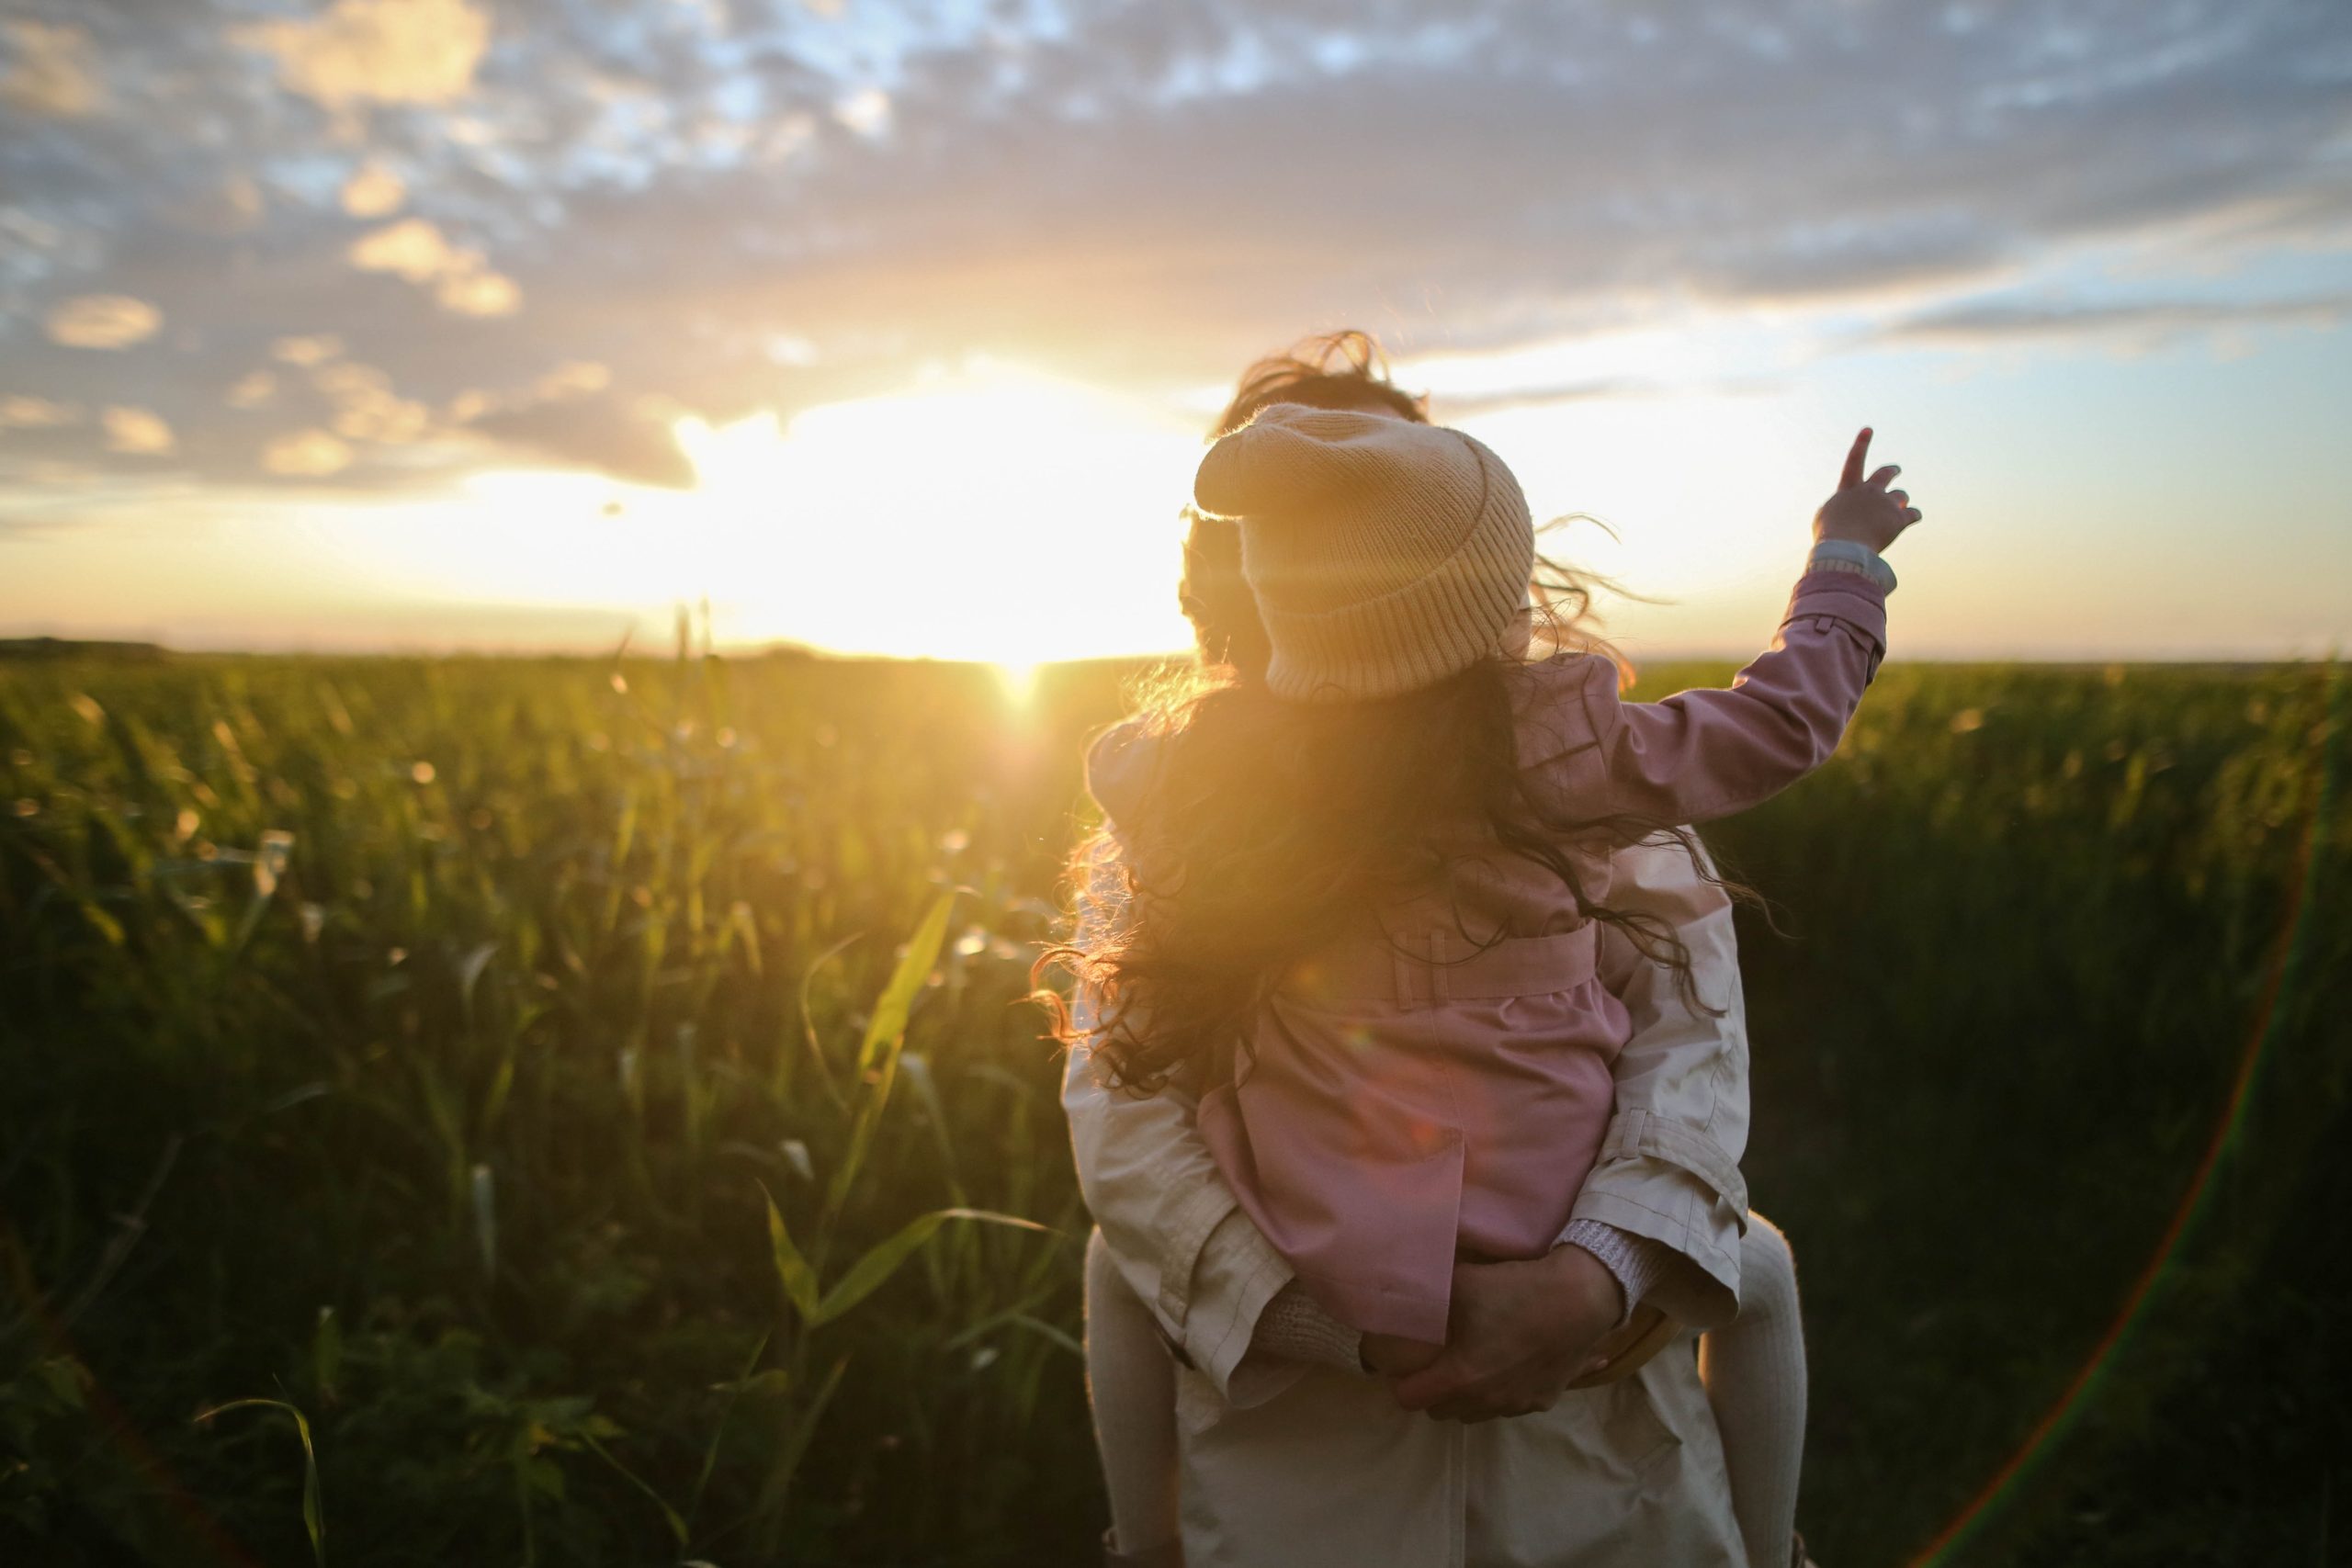 Person holding their kid in a corn field in the sunset. Everyone can feel by being supported by a Los Angeles based group therapy practice that specializes in Asian American mental health. An Asian American therapist in Los Angeles or New York can help with Asian American Therapy near you.